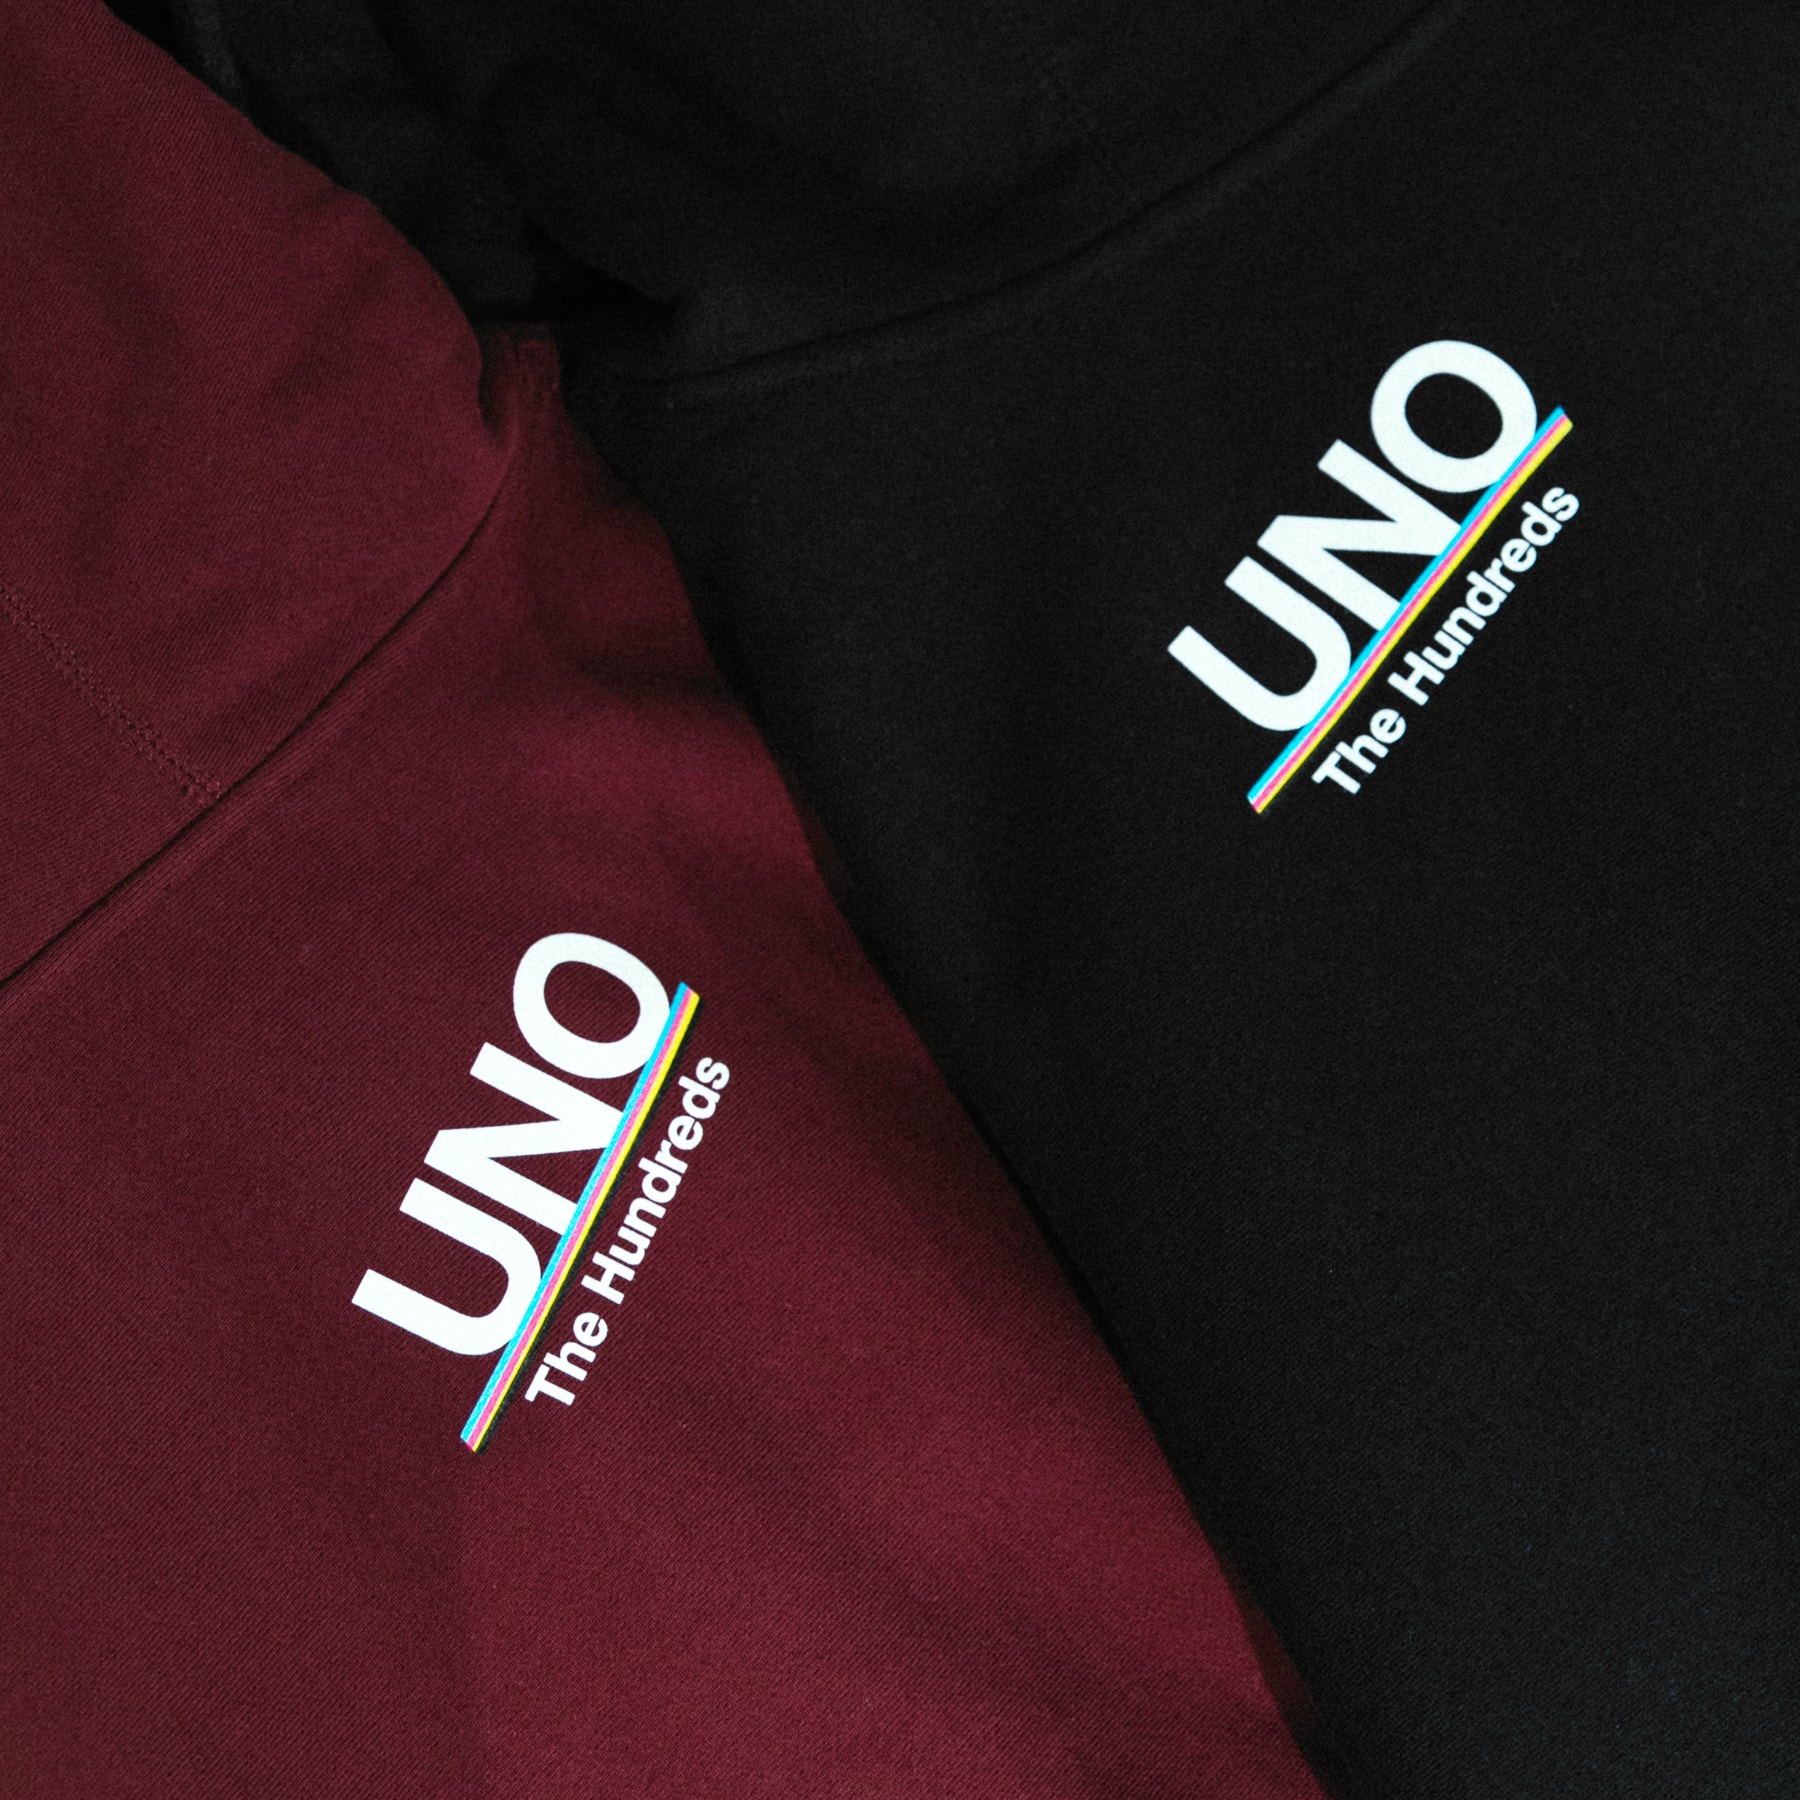 the hundreds uno collaboration card game t-shirt hoodie snapback release date info photos buying guide